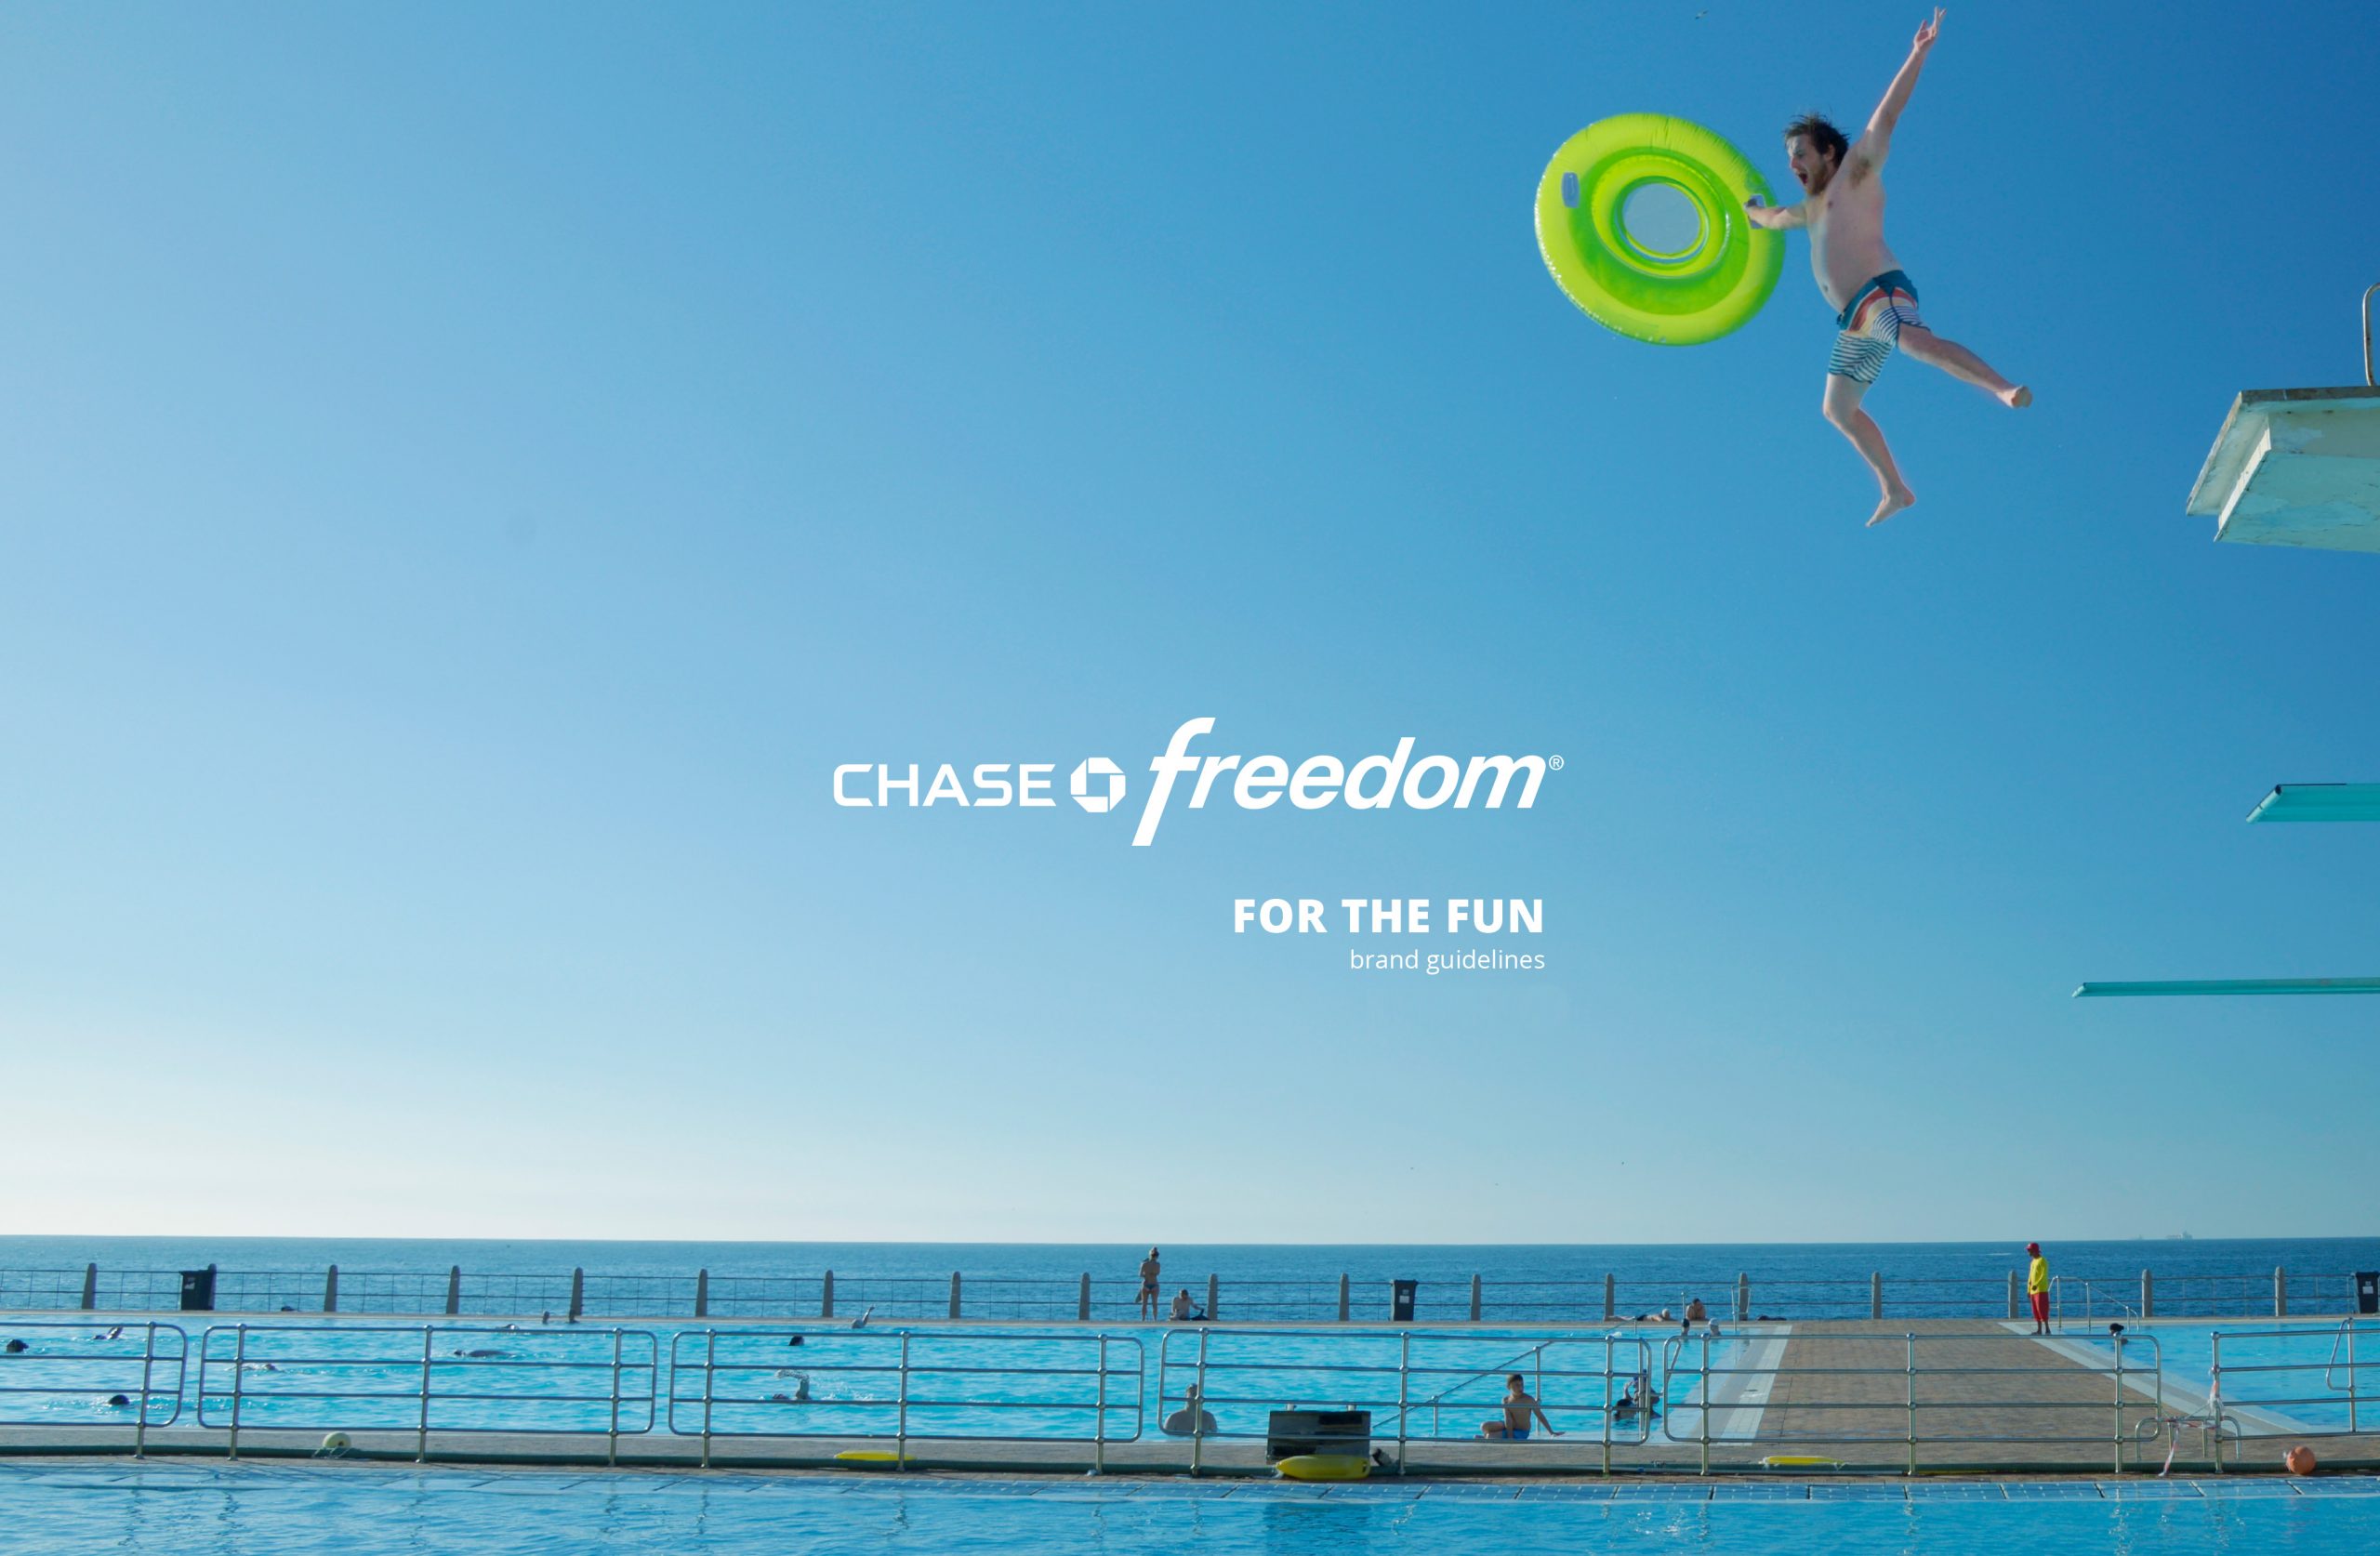 Chase Freedom “For The Fun” Rebrand and Performance Marketing